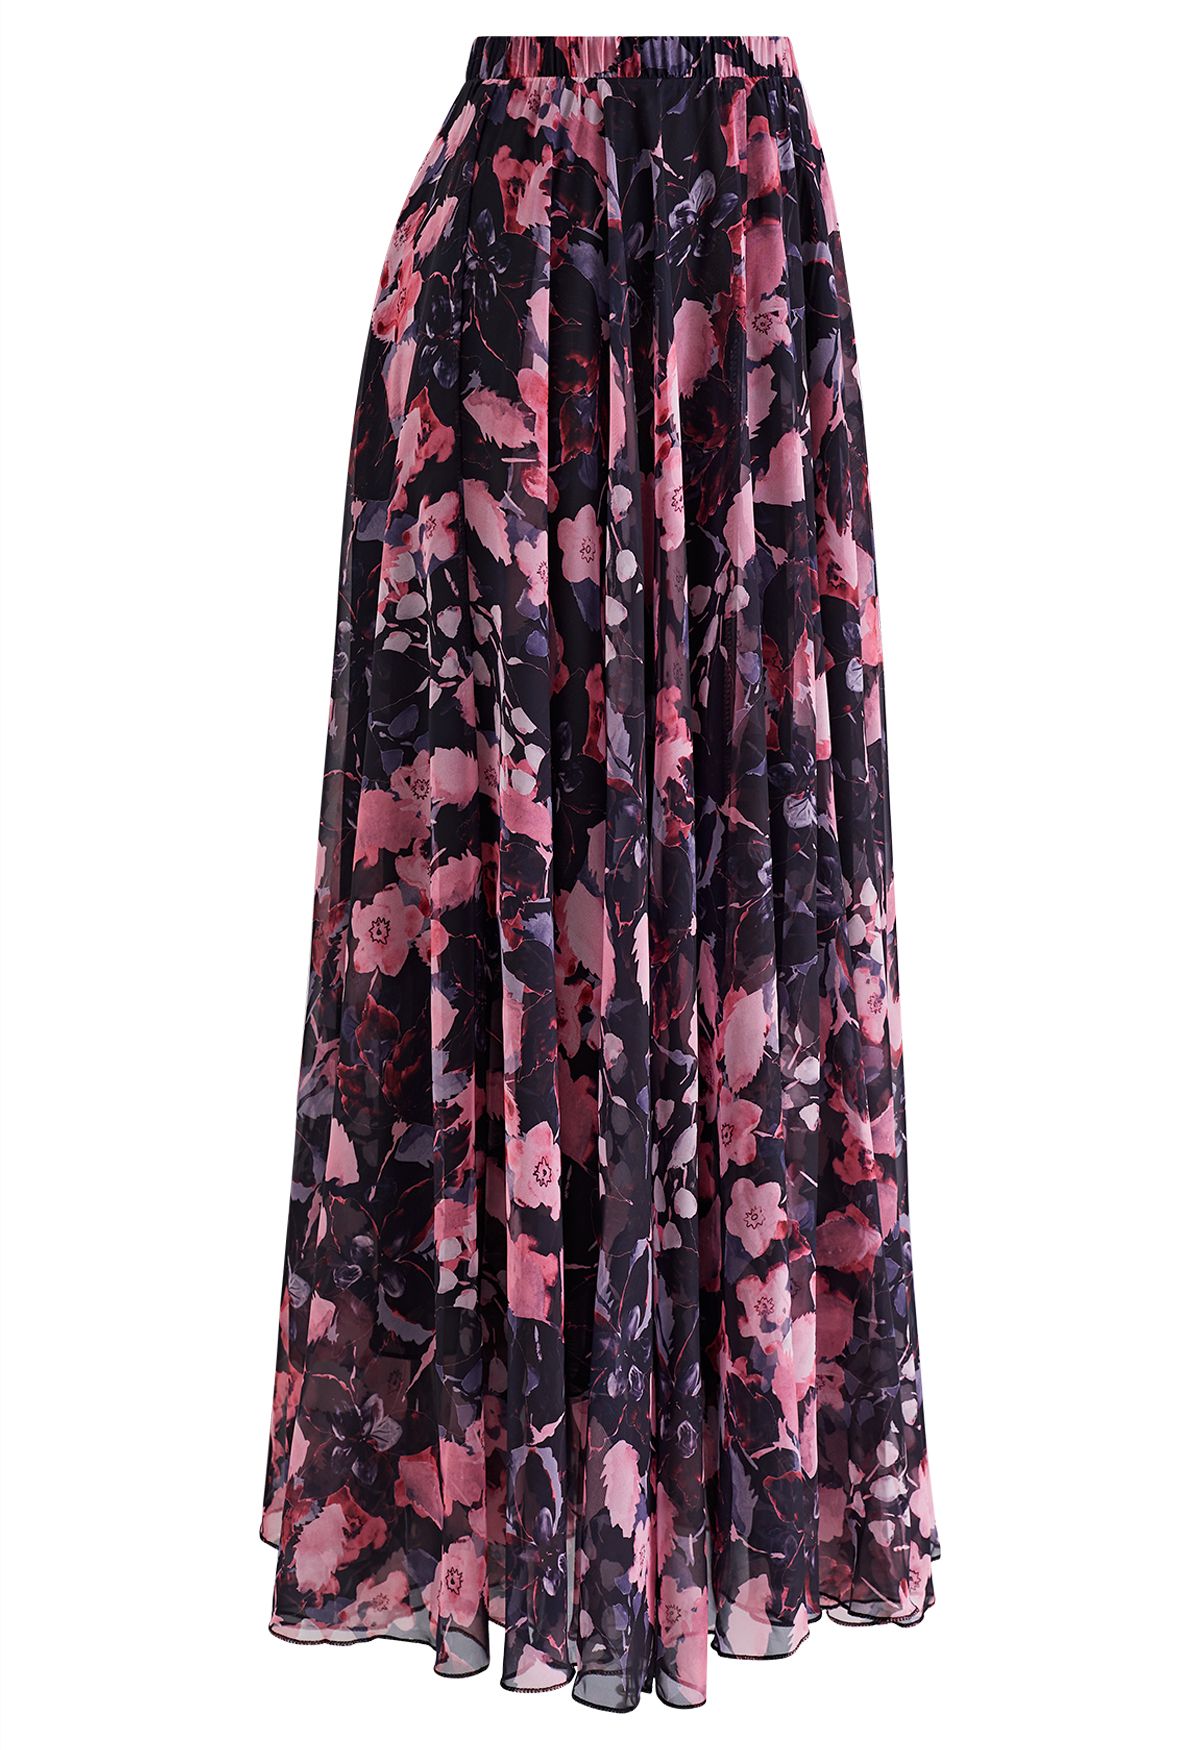 Gorgeous Pink Floral Watercolor Chiffon Maxi Skirt - Retro, Indie and ...